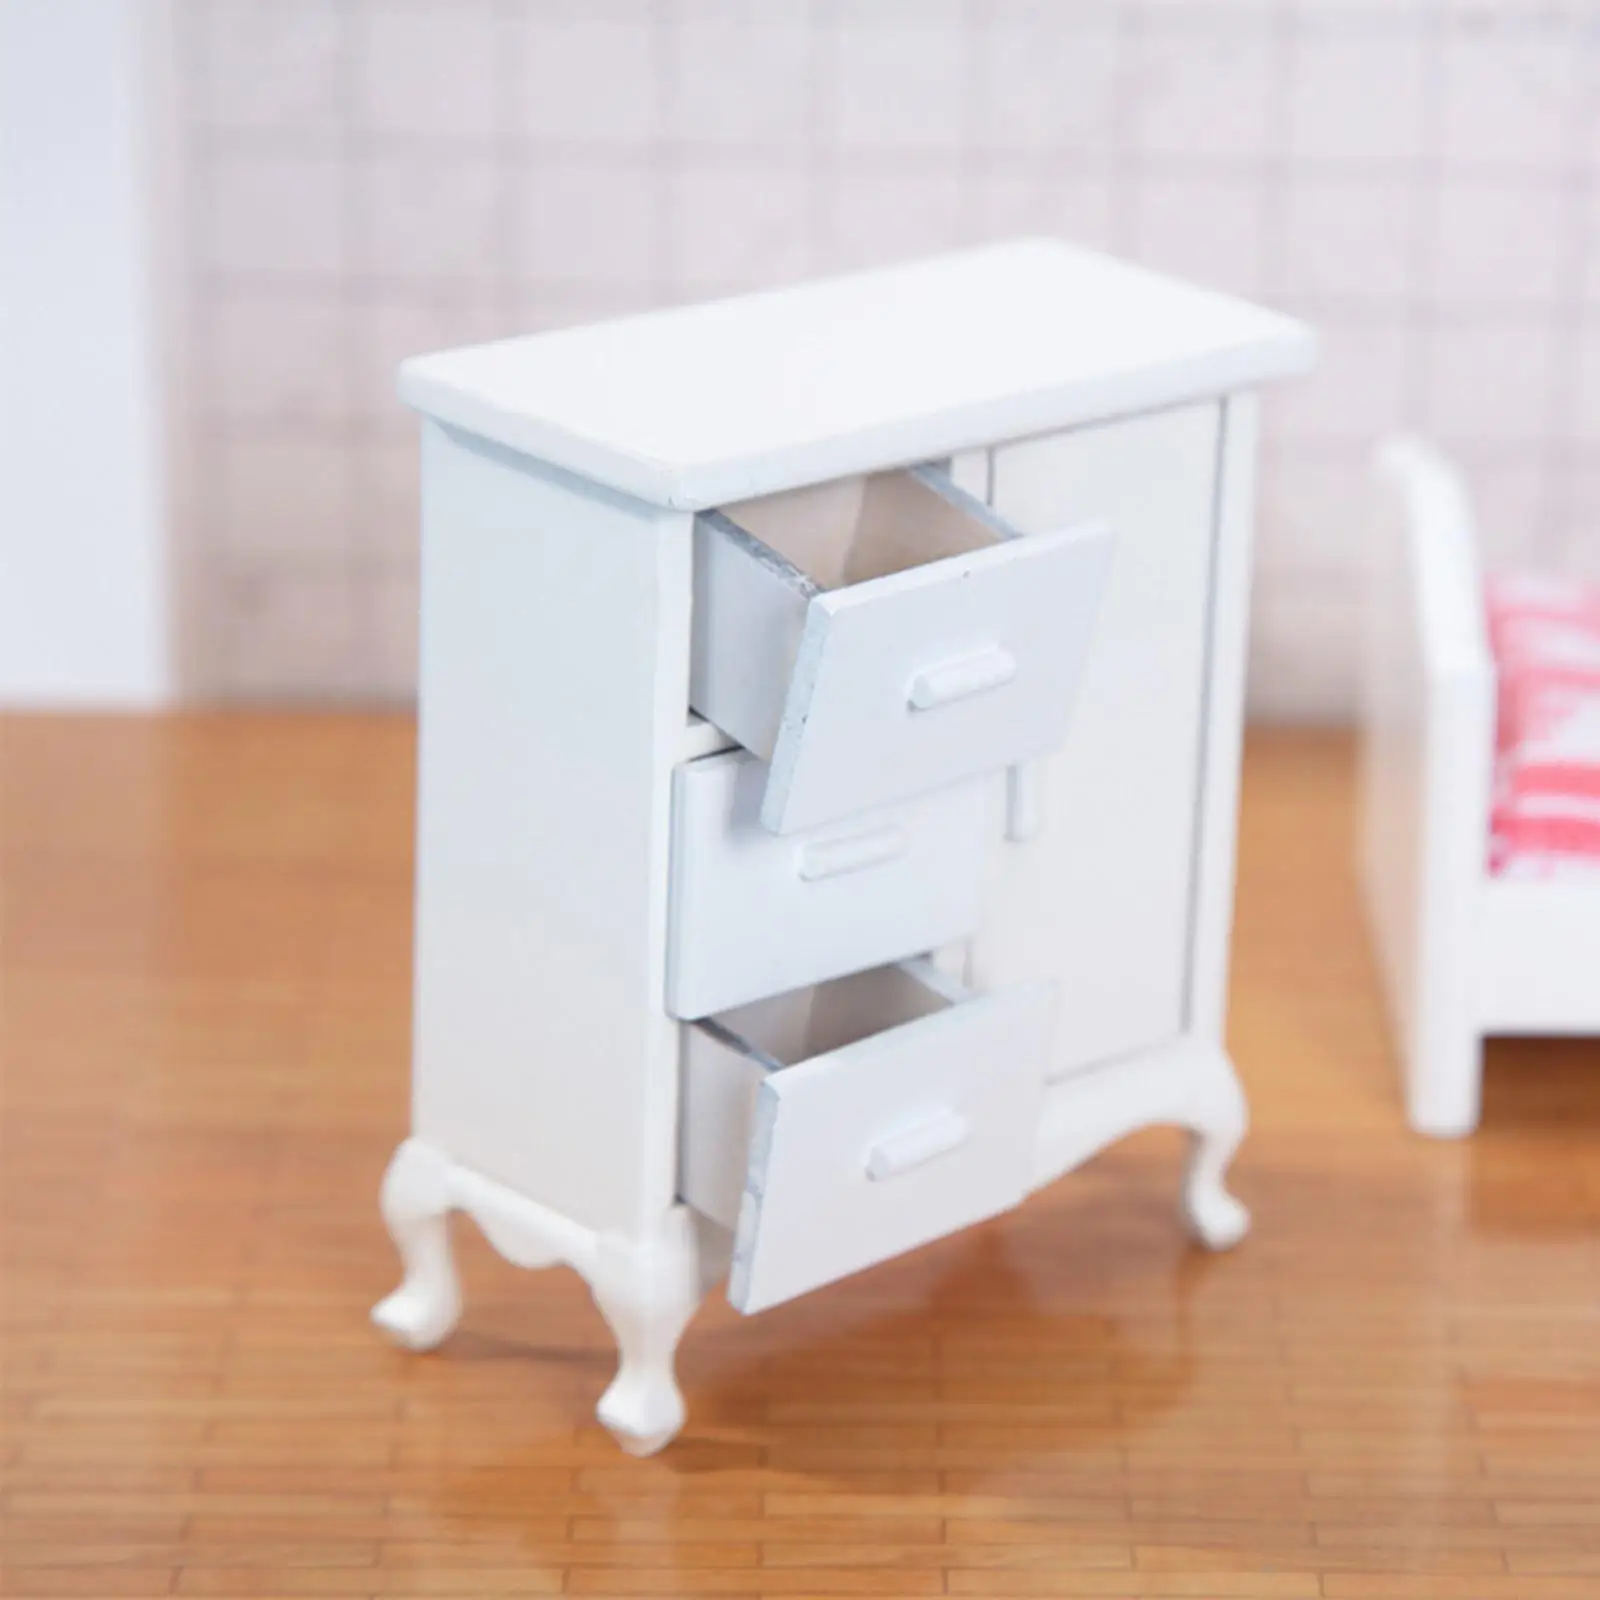 Miniature Furniture Room DIY Accessories Wooden Decorative Mini Cabinet Ornaments for Role Play Handcraft gift Scene Layout